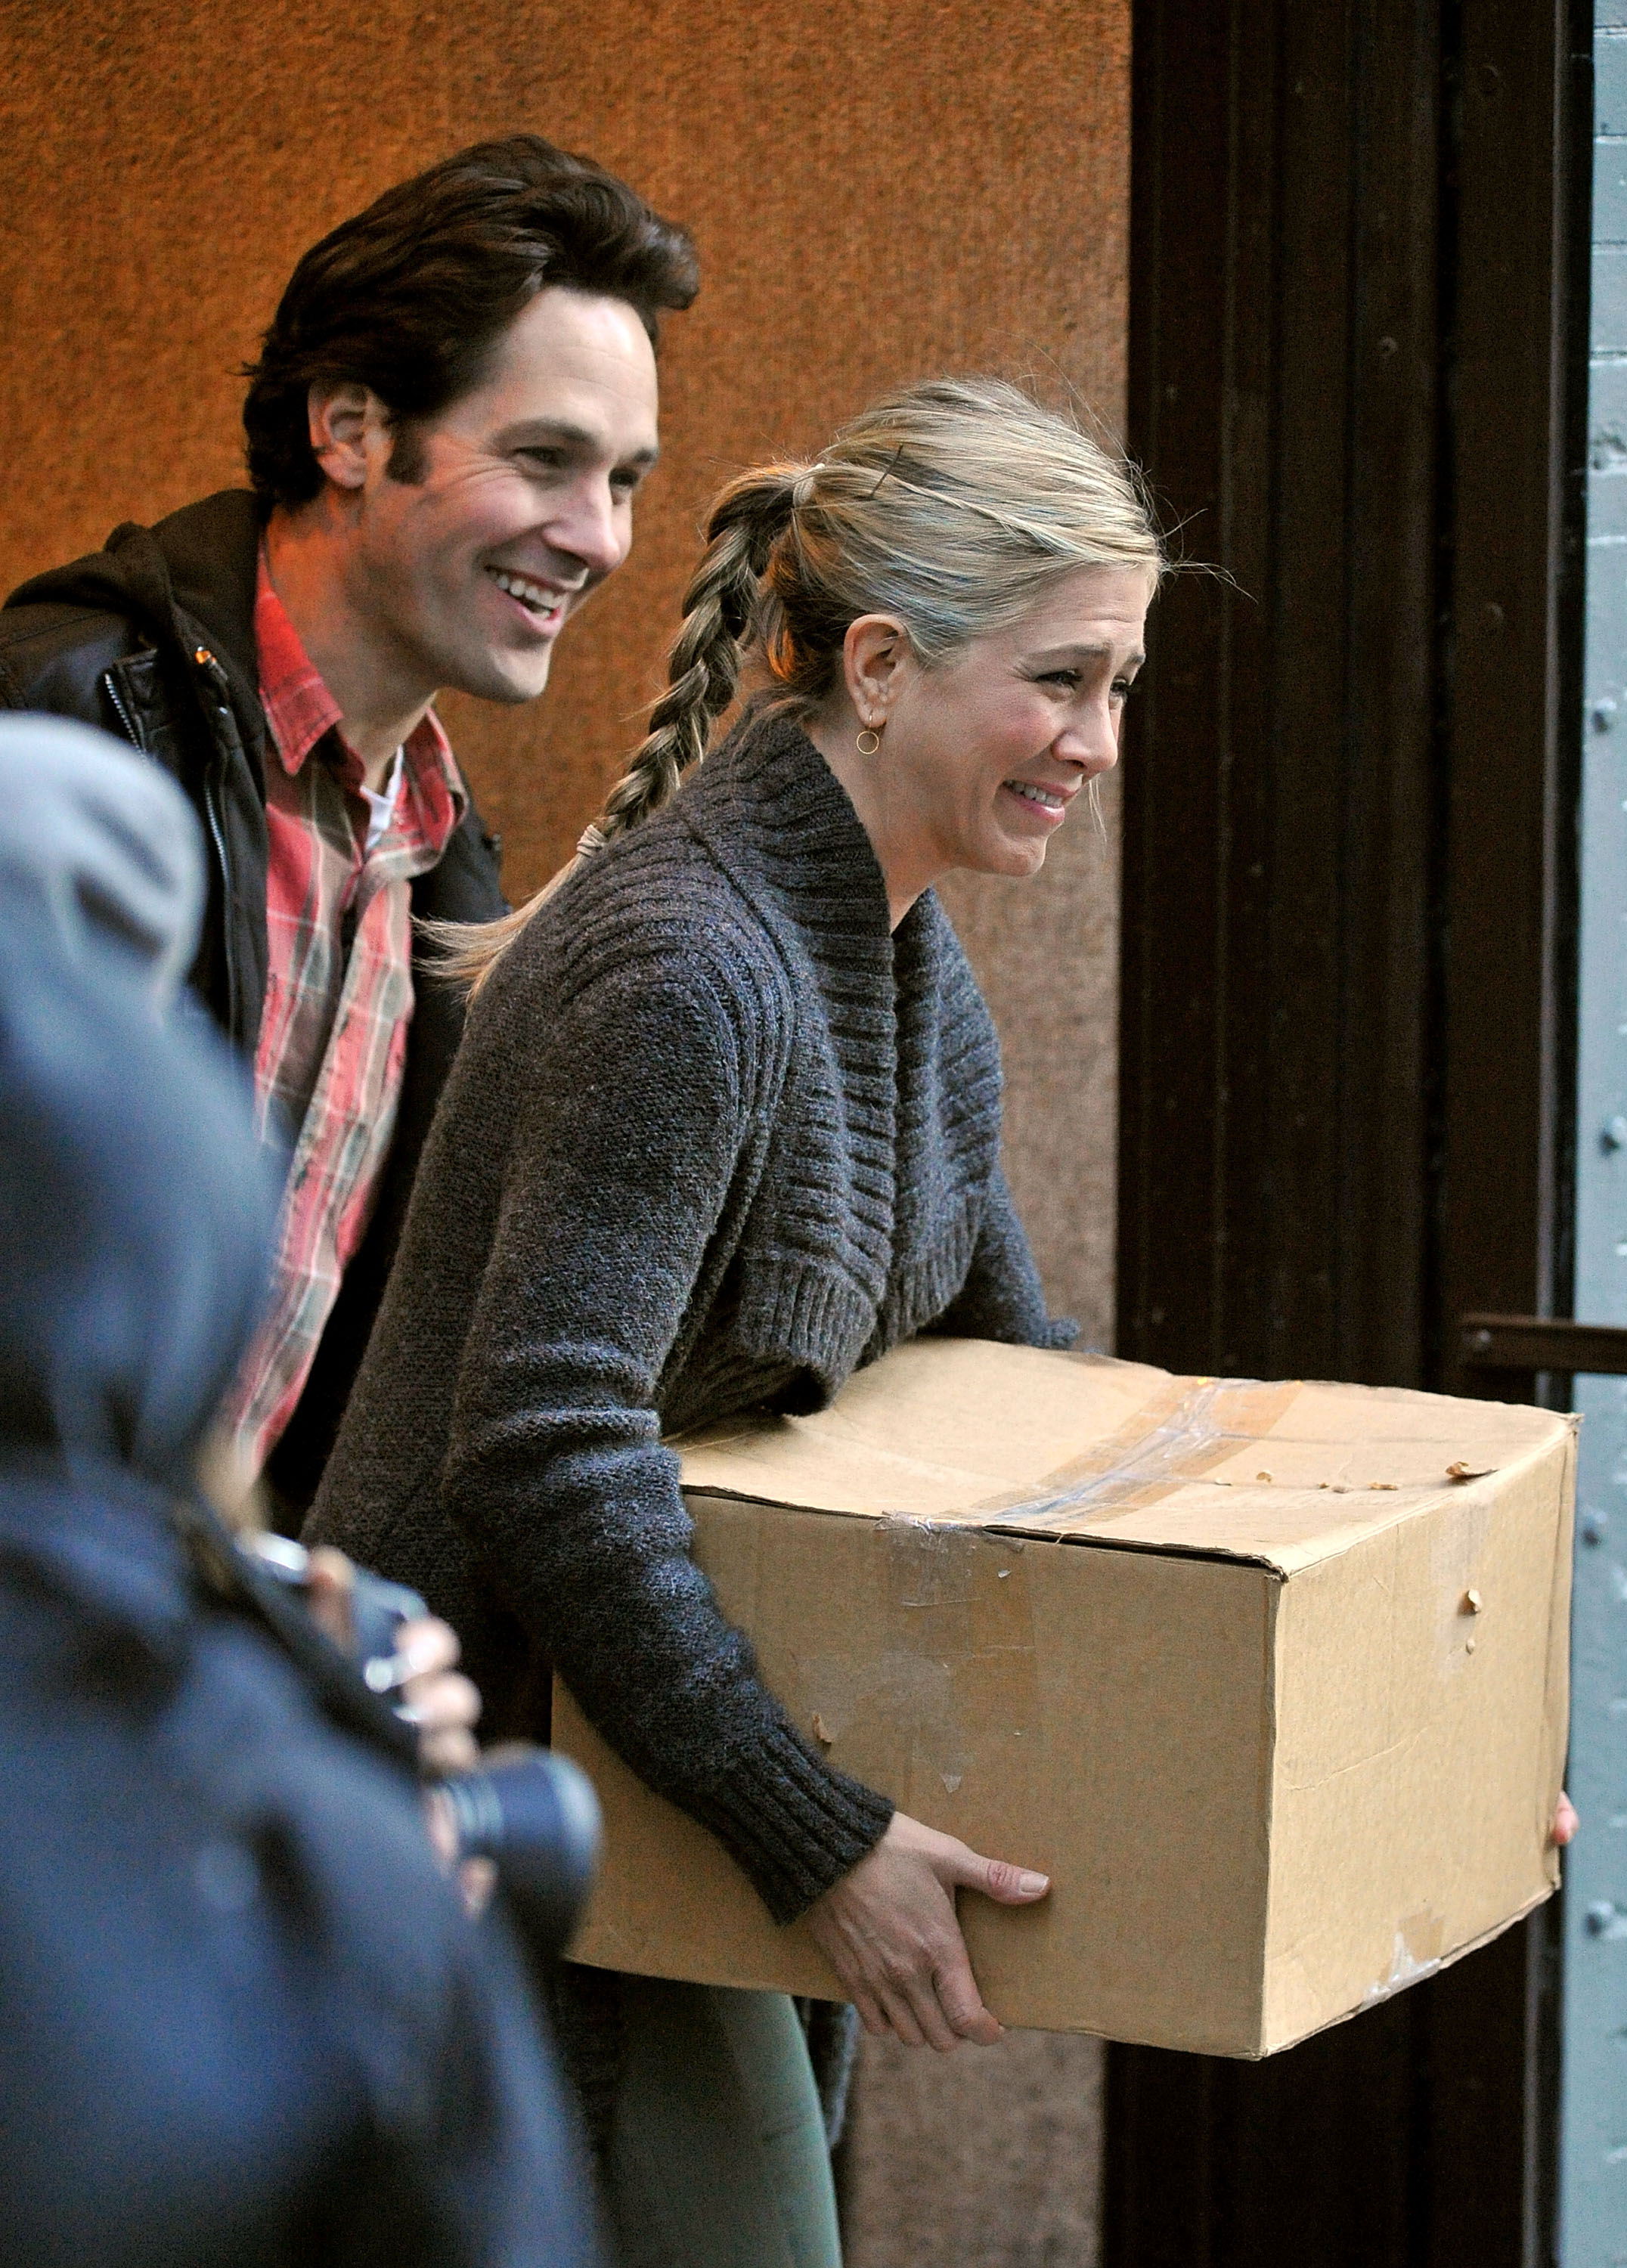 Paul Rudd and Jennifer Aniston seen on the streets of Manhattan on November 19, 2010 in New York City. | Source: Getty Images